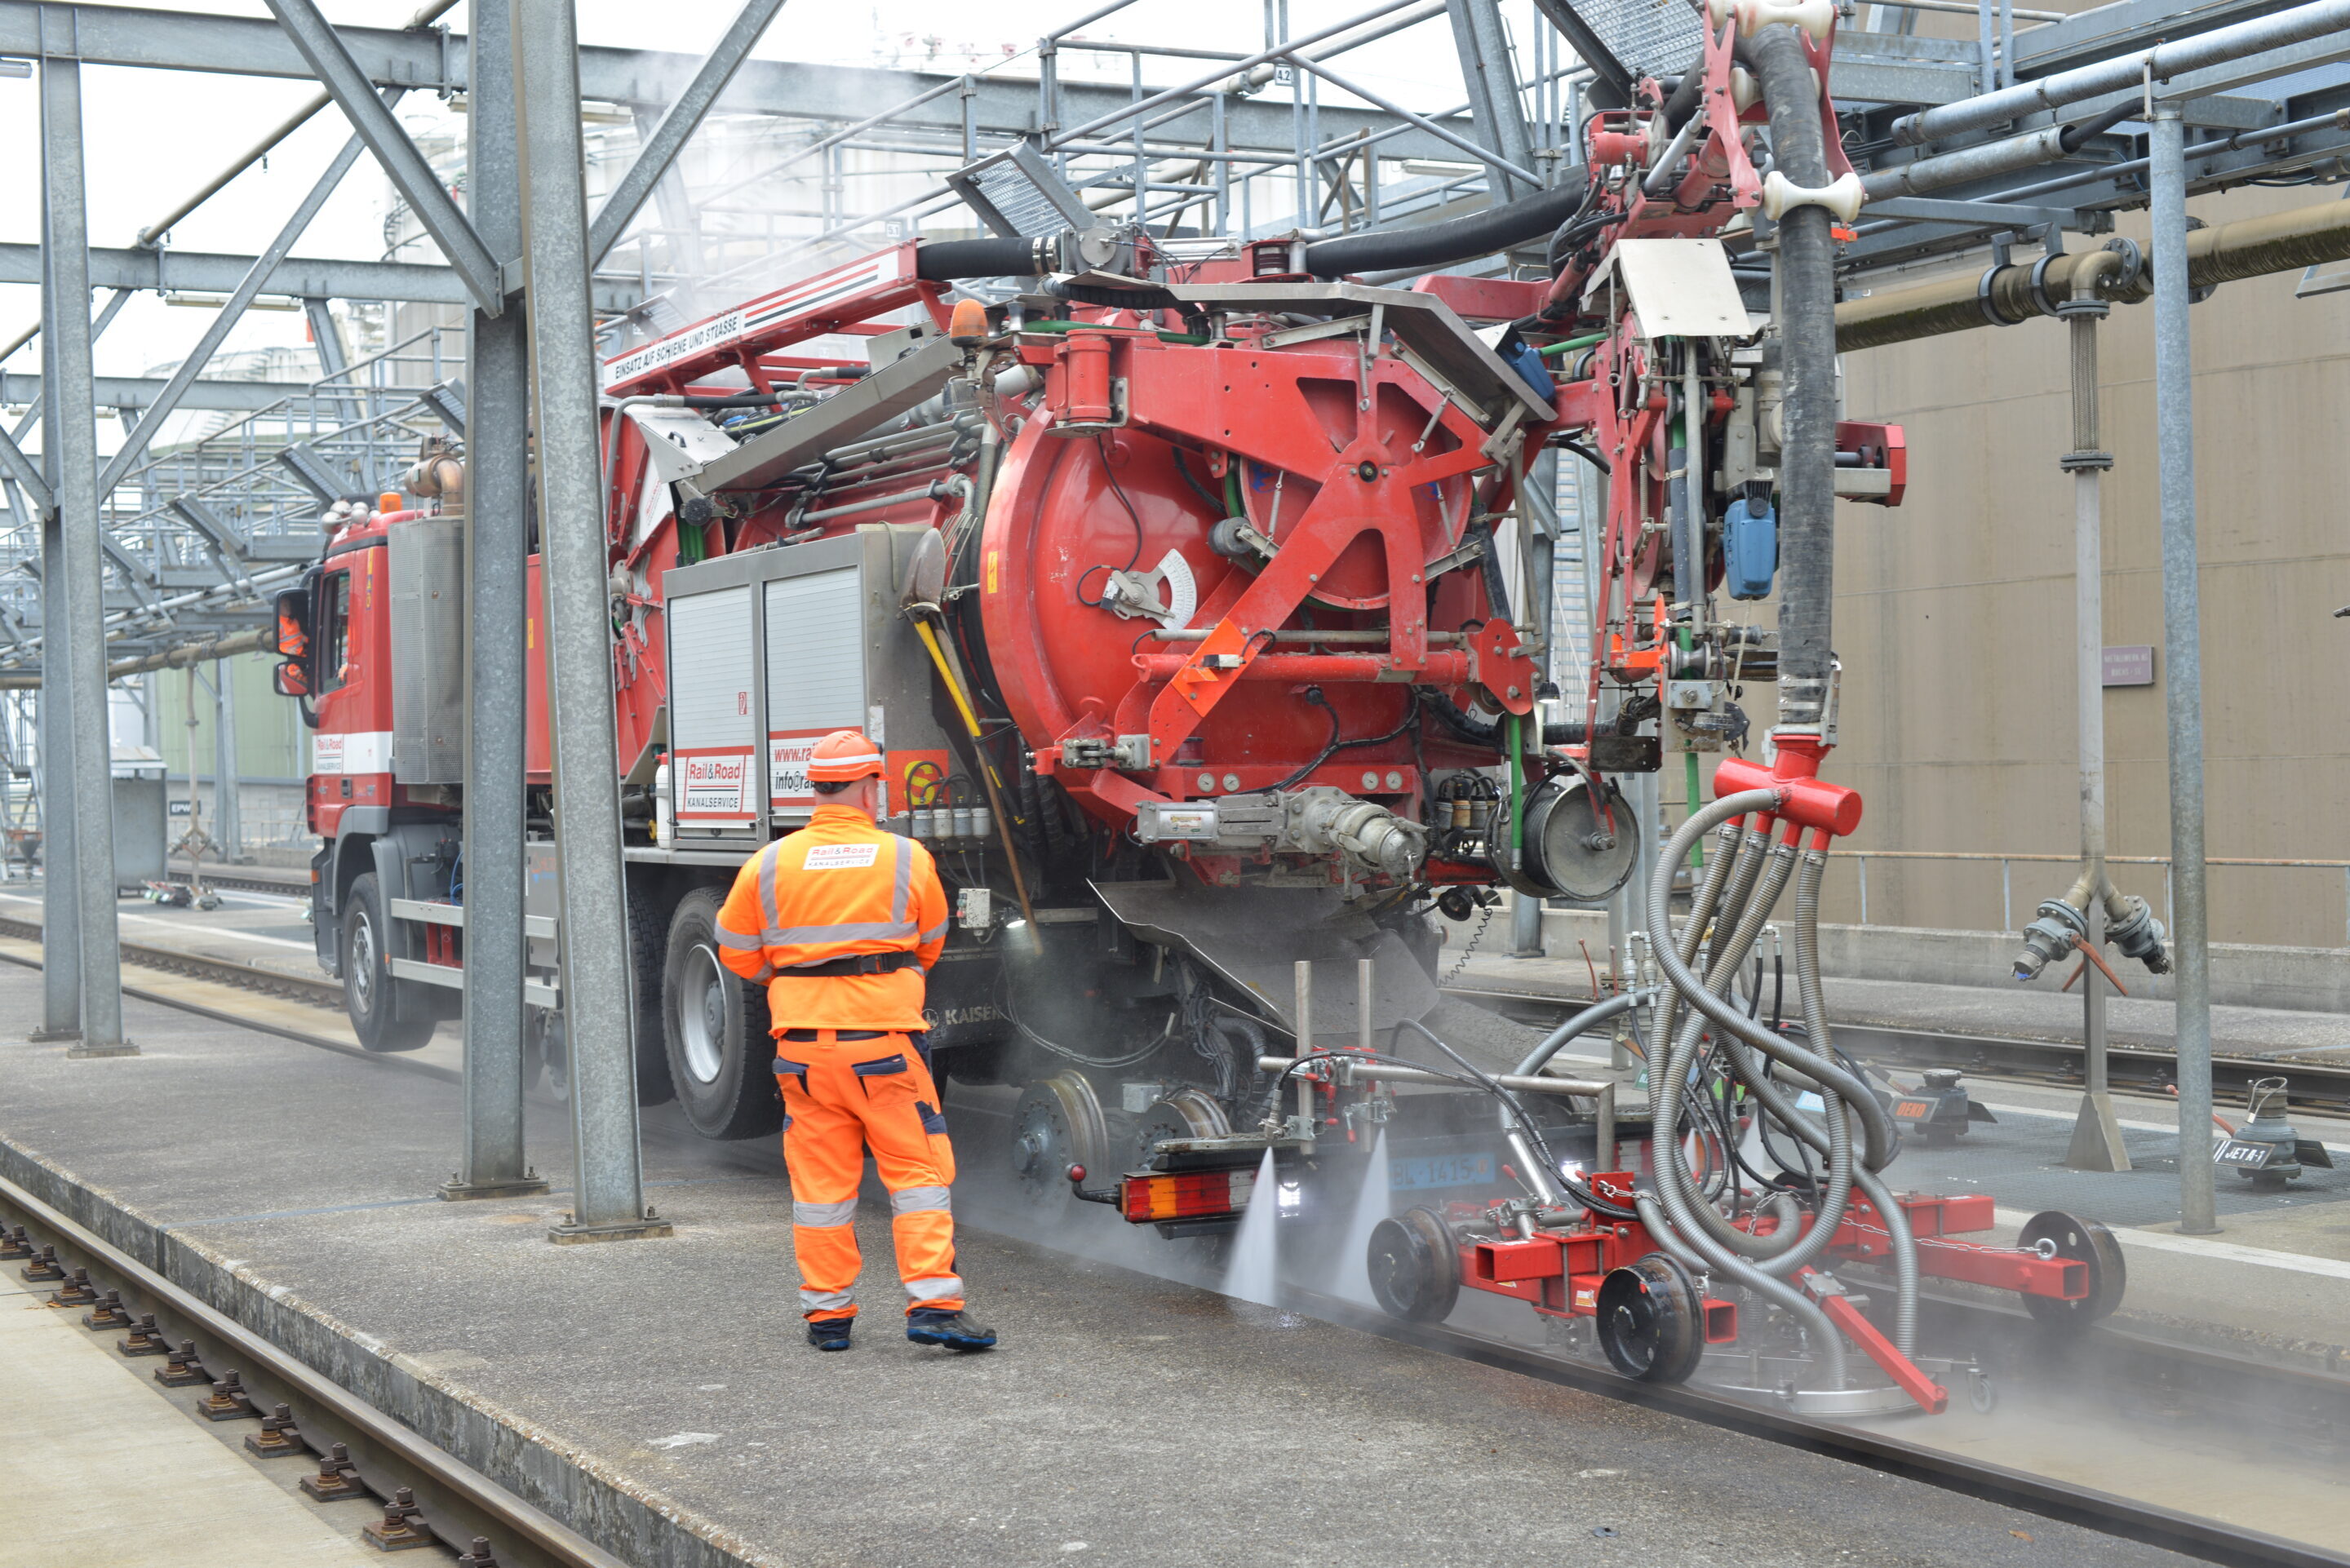 Whether route or rail cleaning - Rail & Road does it!